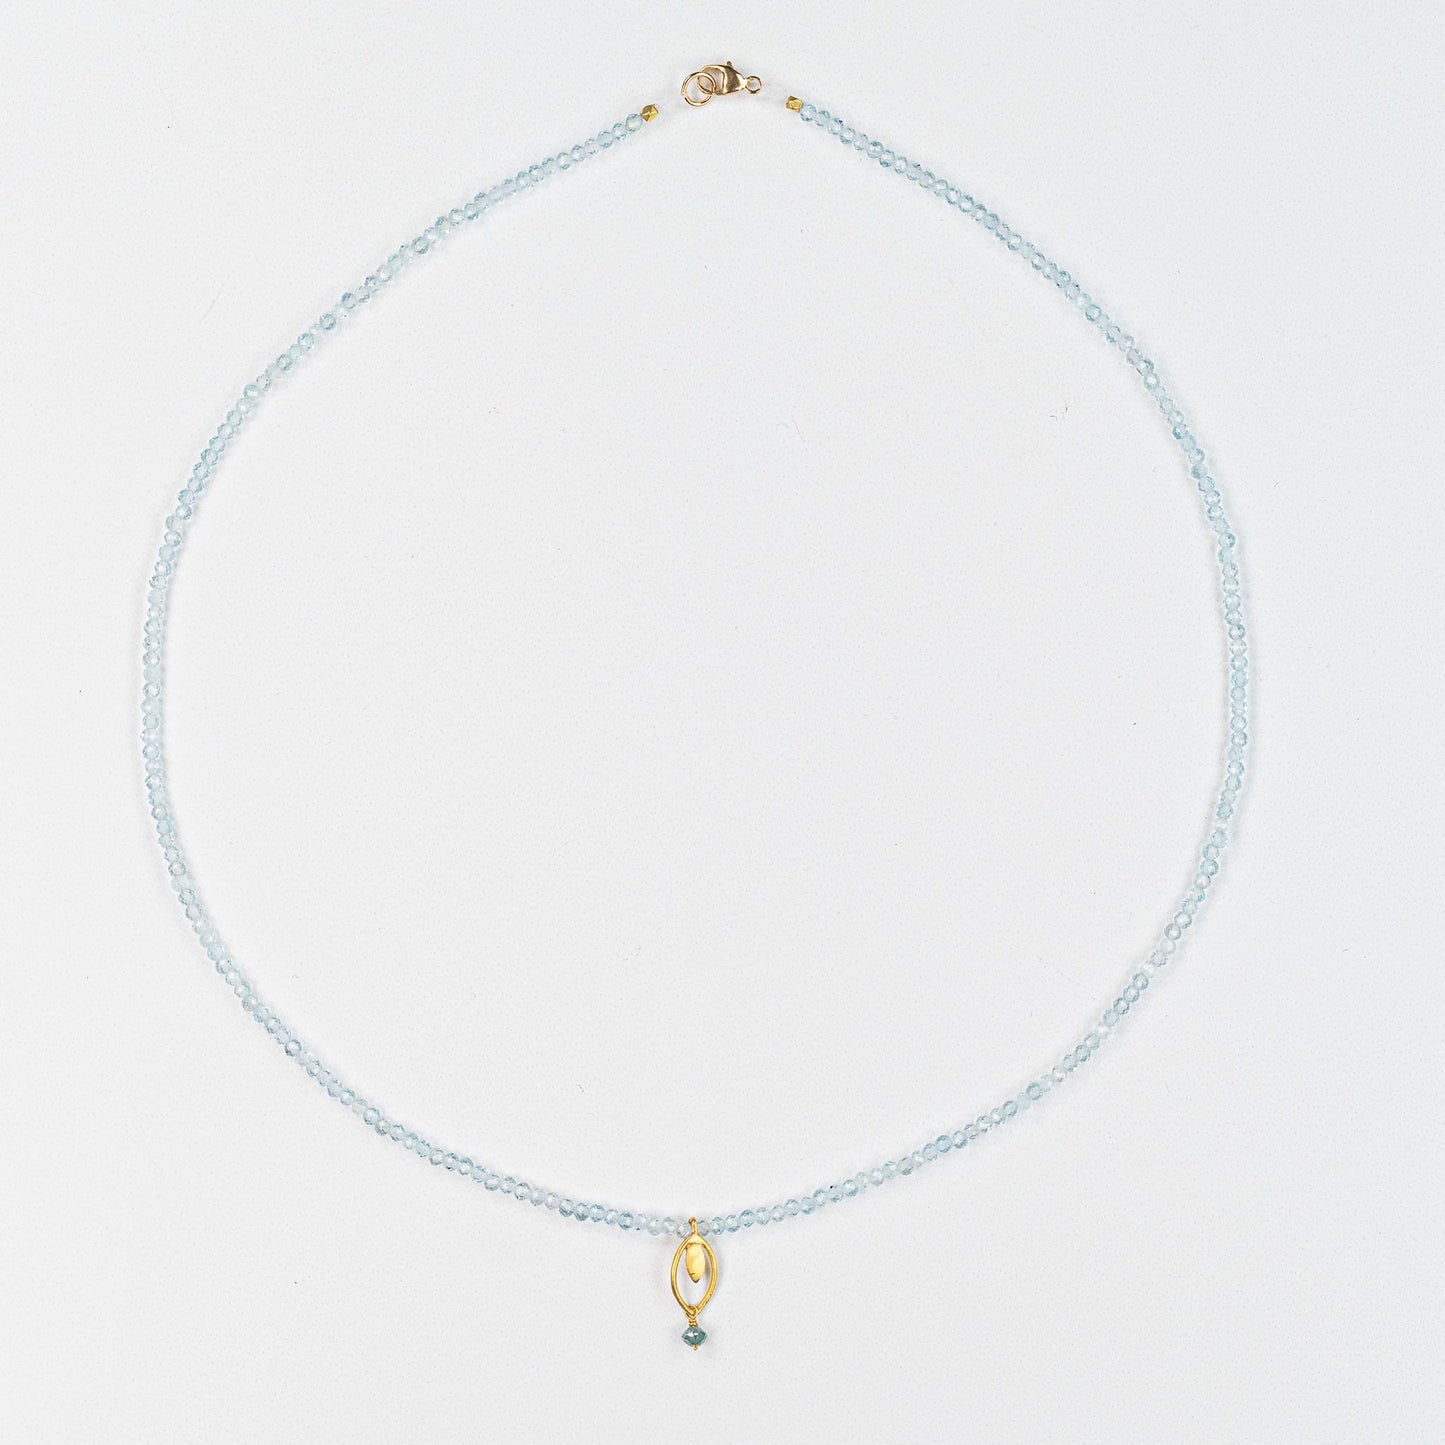 Blue Topaz Beaded Necklace with 18K Charm and Diamond Drop